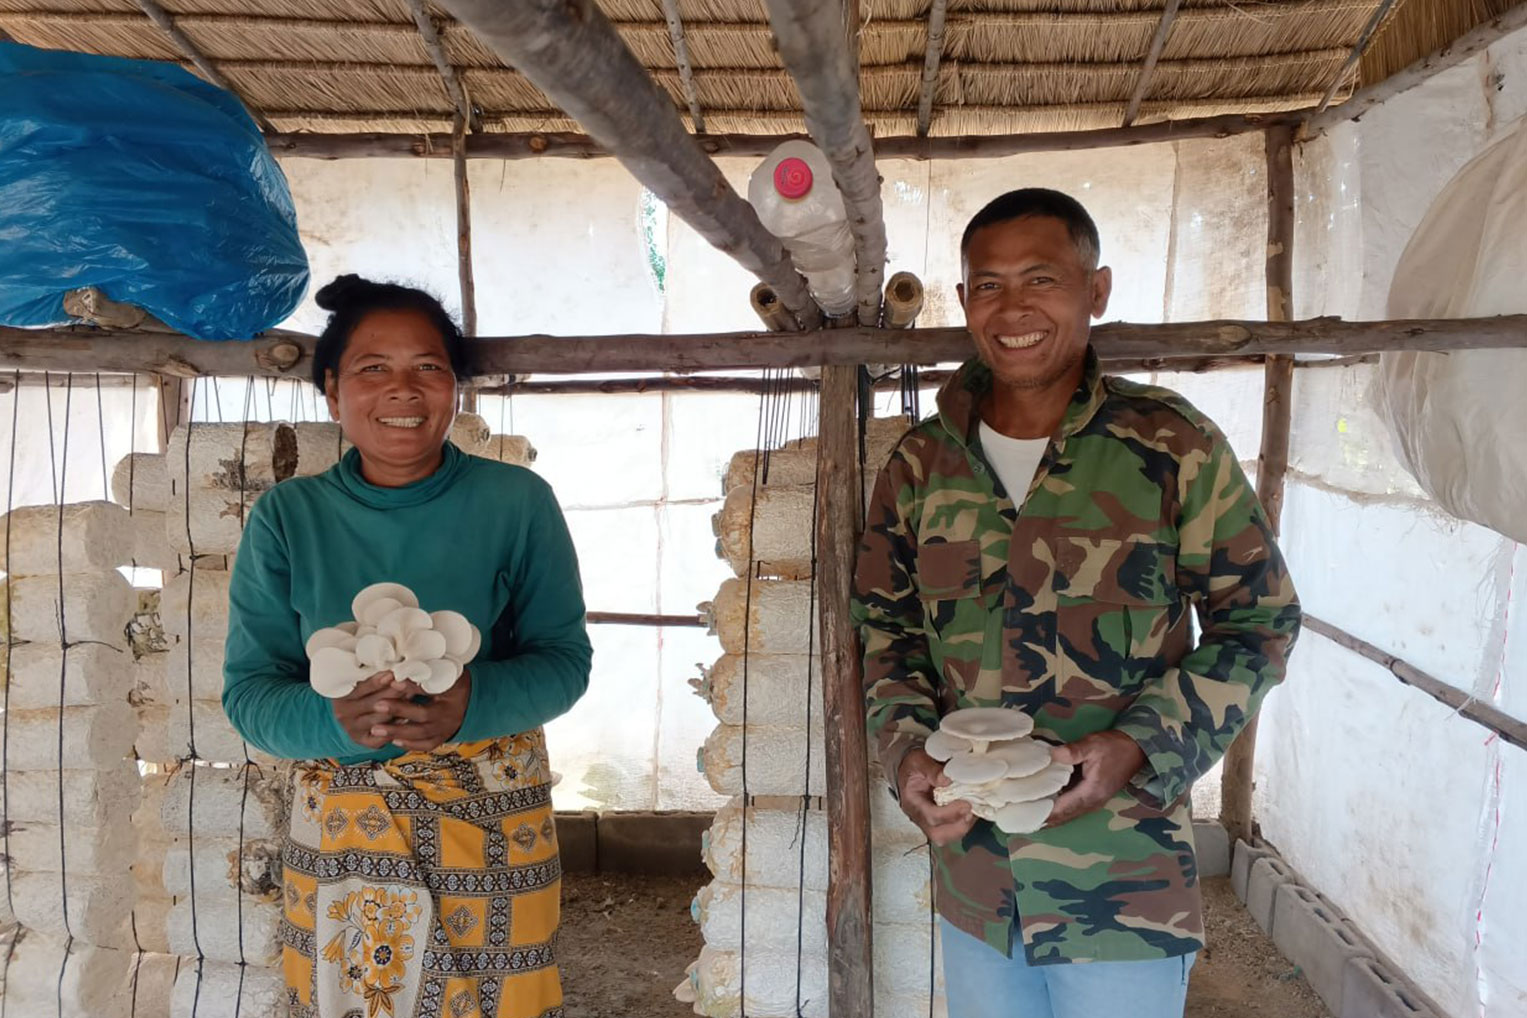 San and her husband are growing mushrooms as a cash crop to provide for their family.